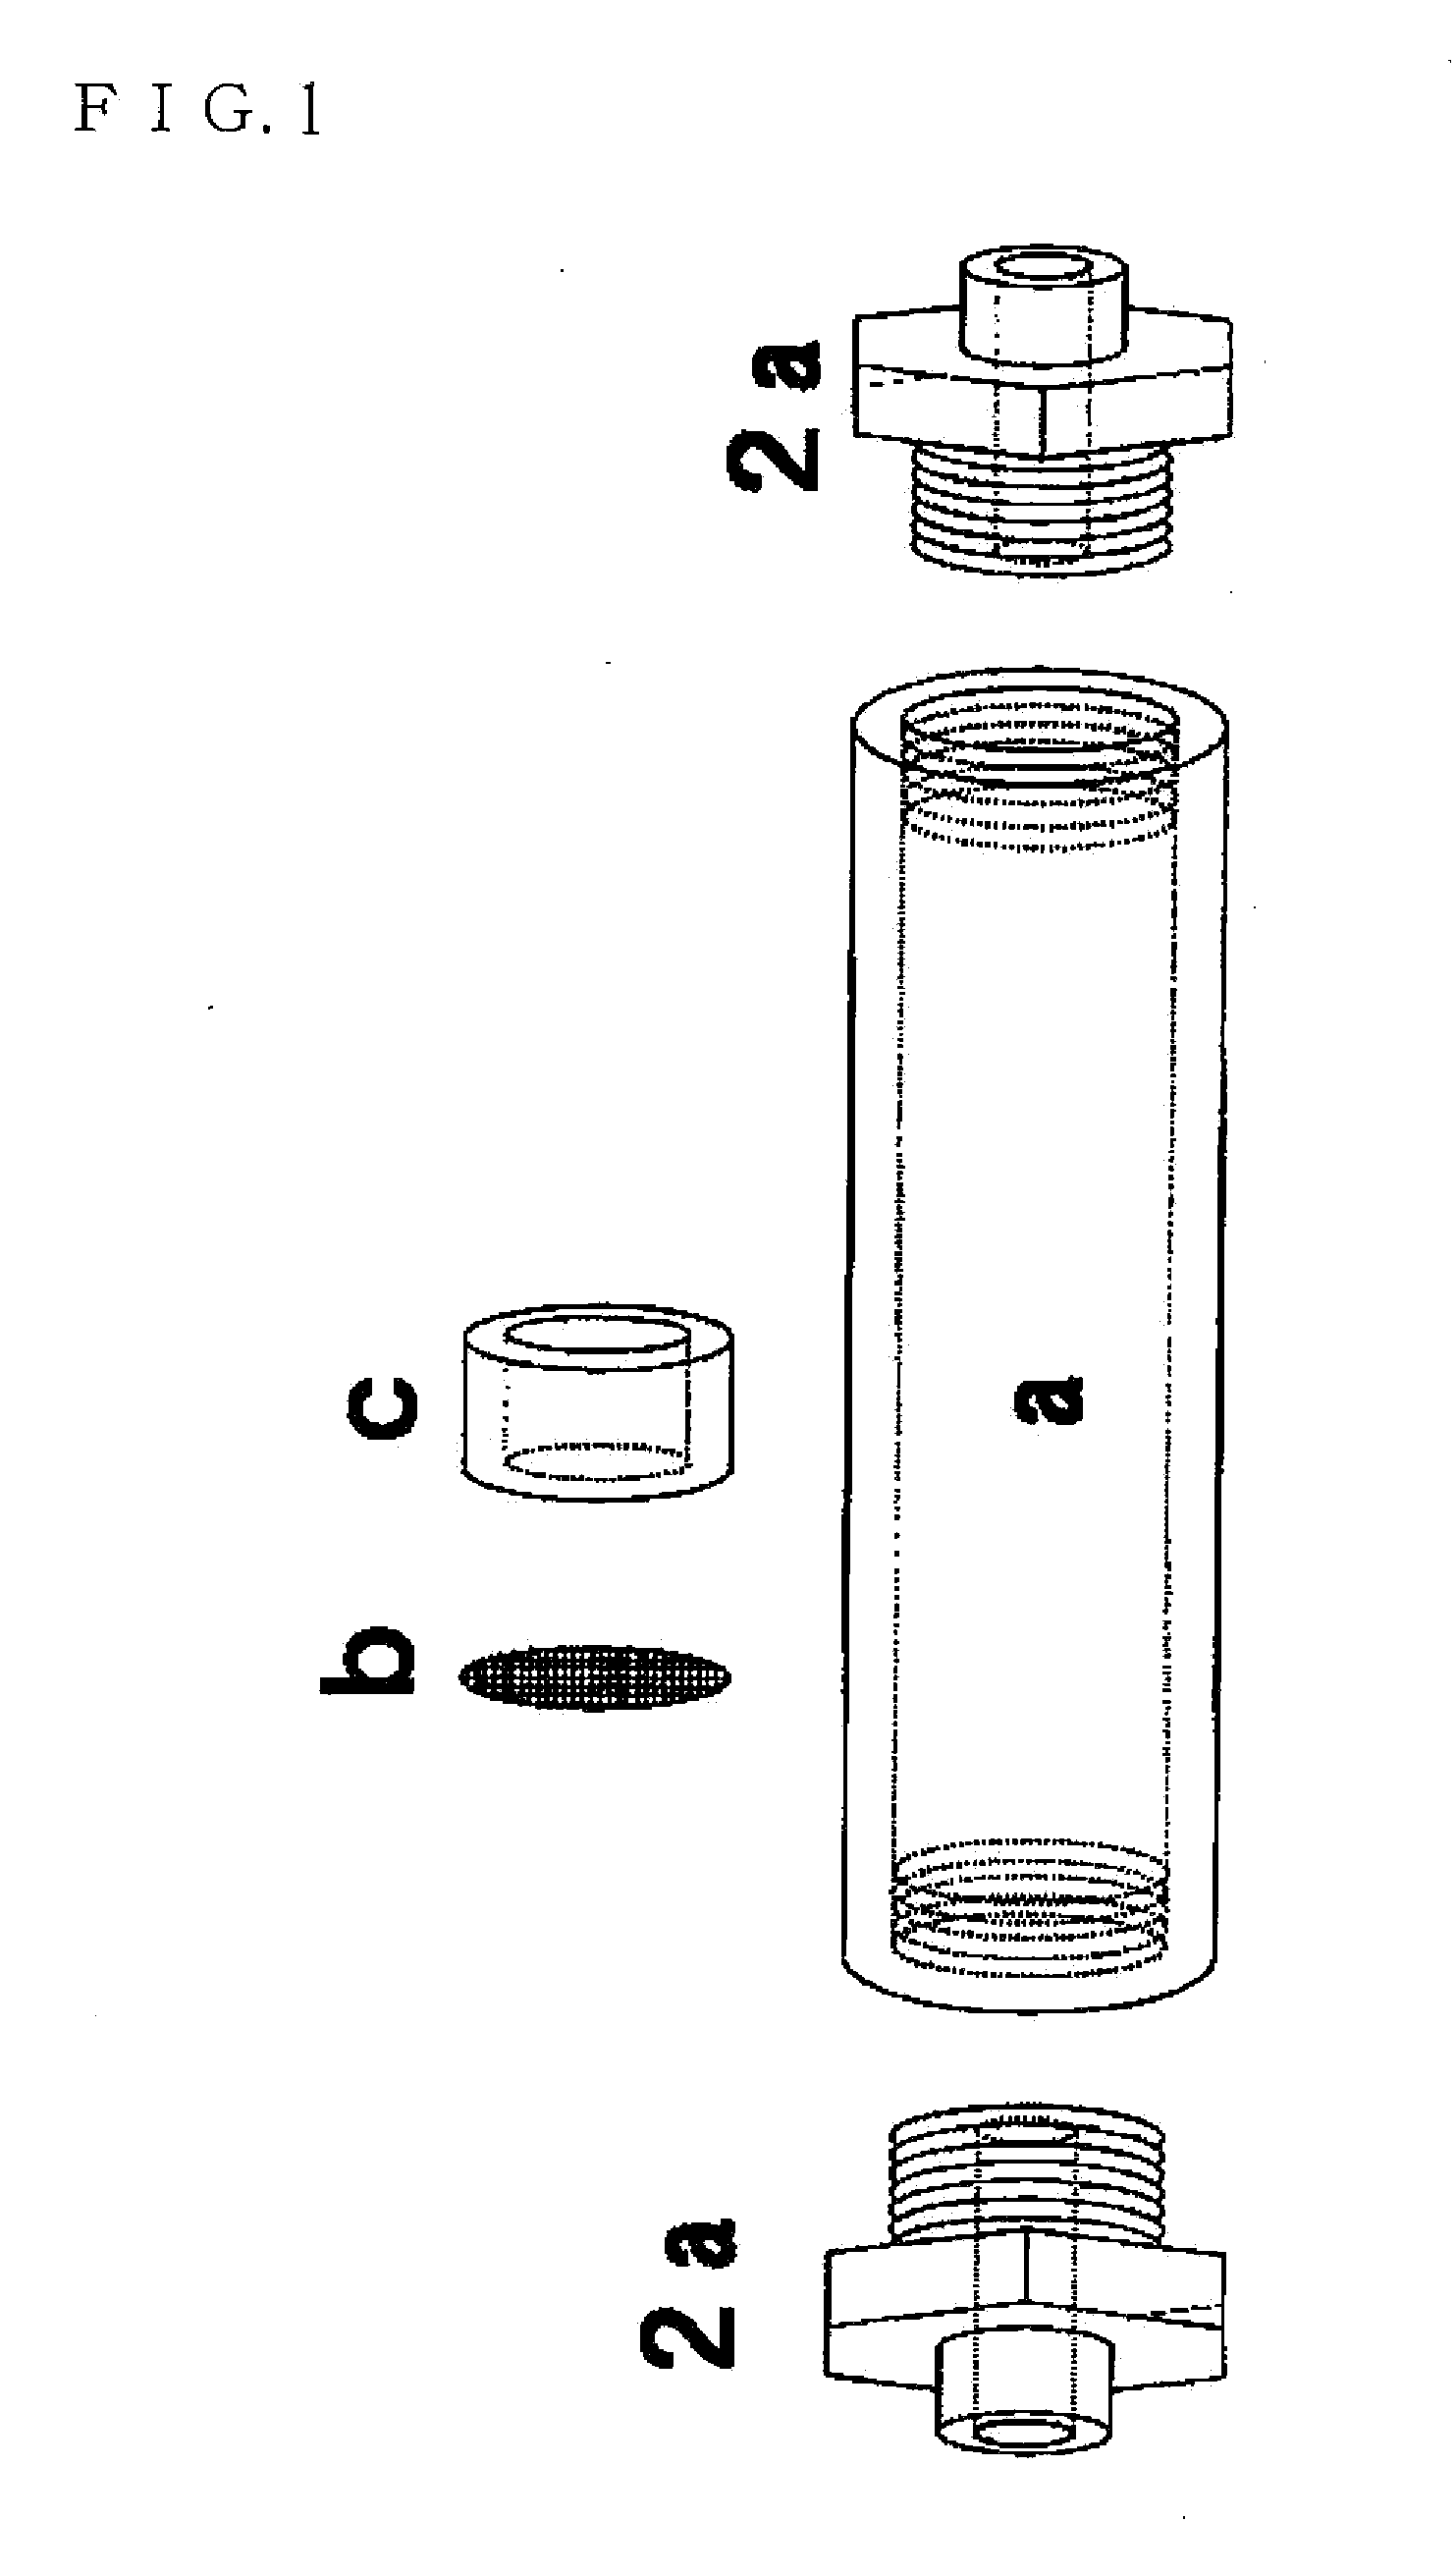 Method and apparatus for controlling particle diameter and particle diameter distribution of emulsion particles in emulsion